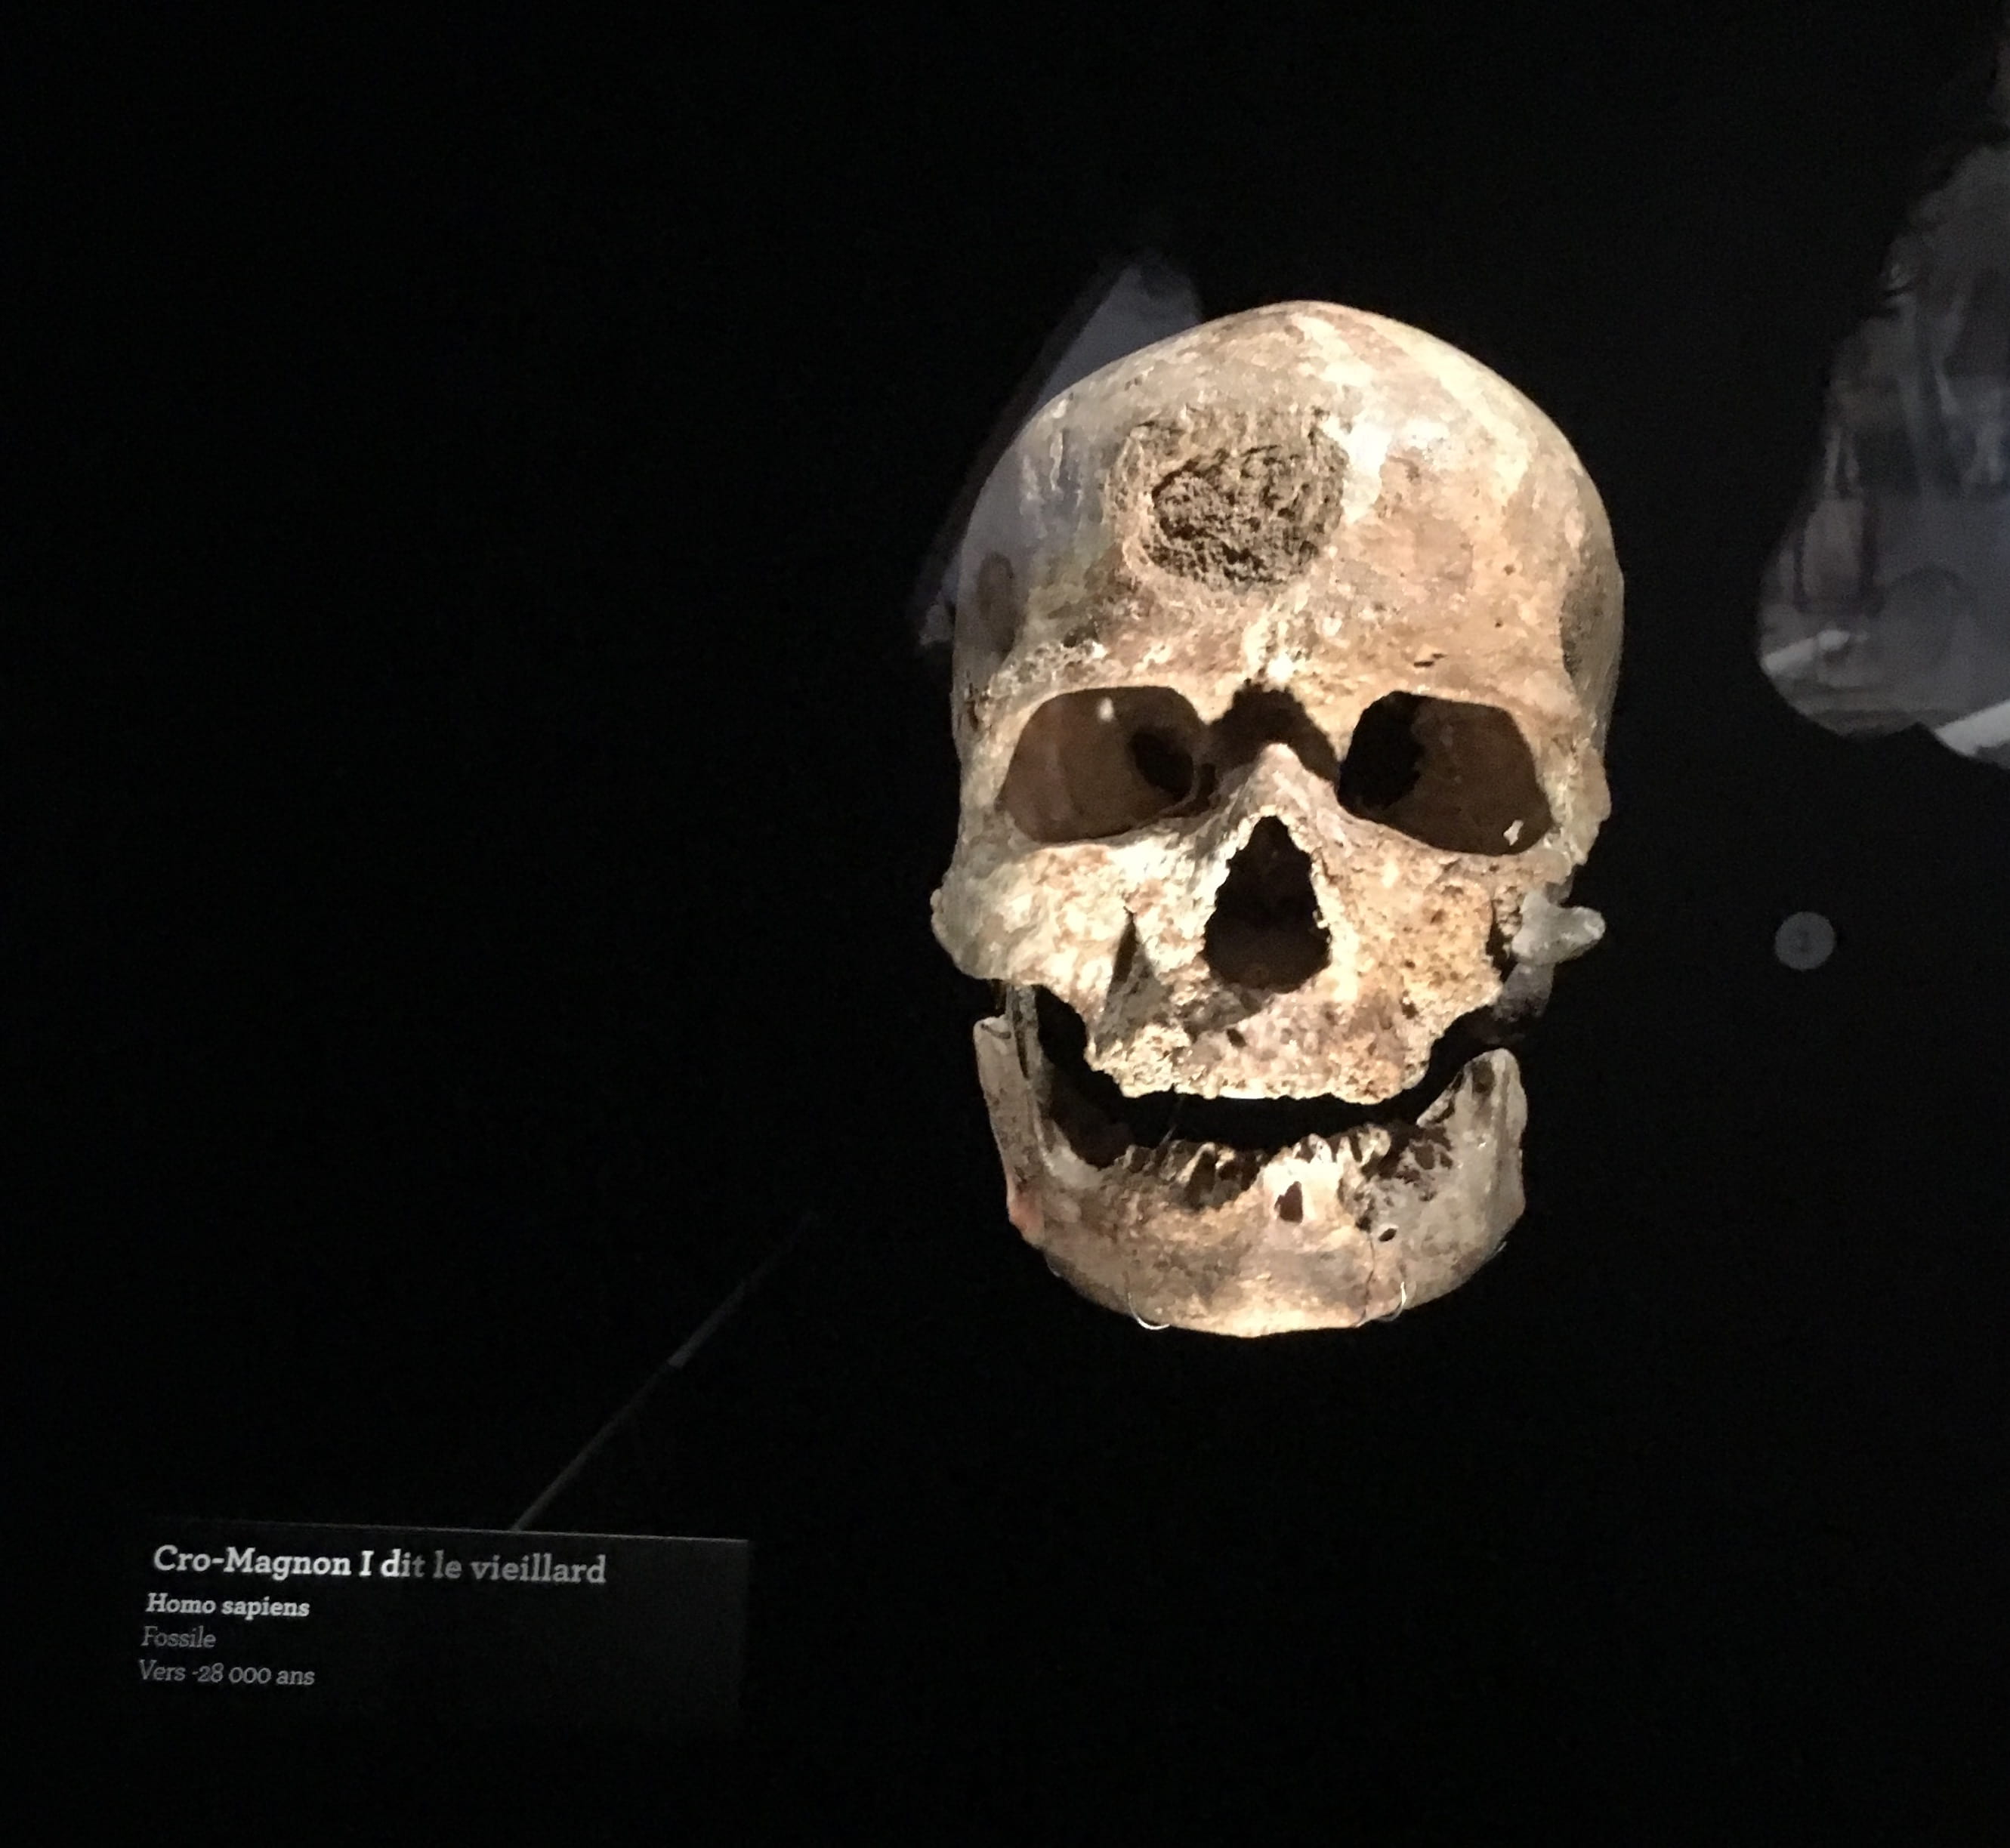 Real skulls from our ancestors, such as Cro-Magnon man, excavated in France are a highlight (author photo)